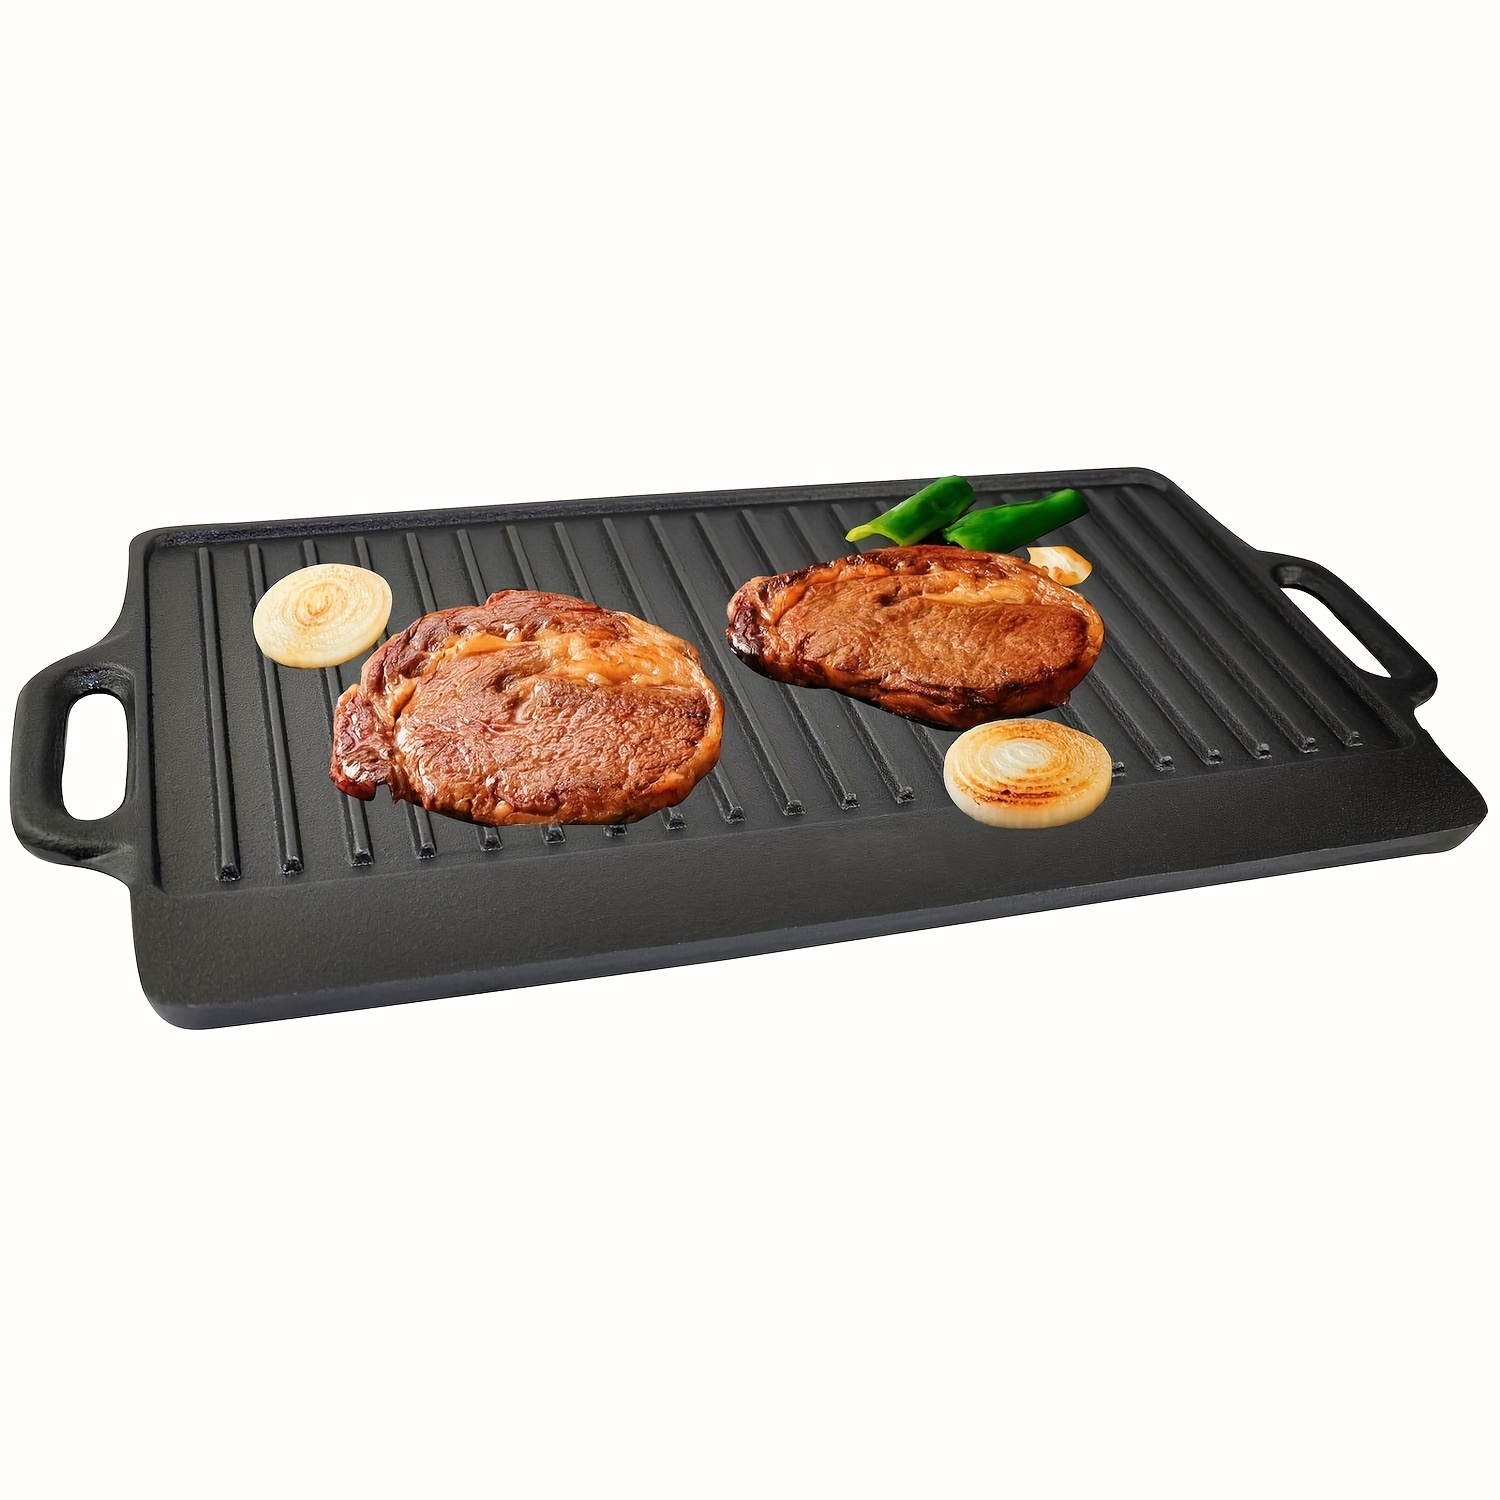 Cast Iron Reversible Griddle Grill Pan - Non Stick Skillet Bbq Hot